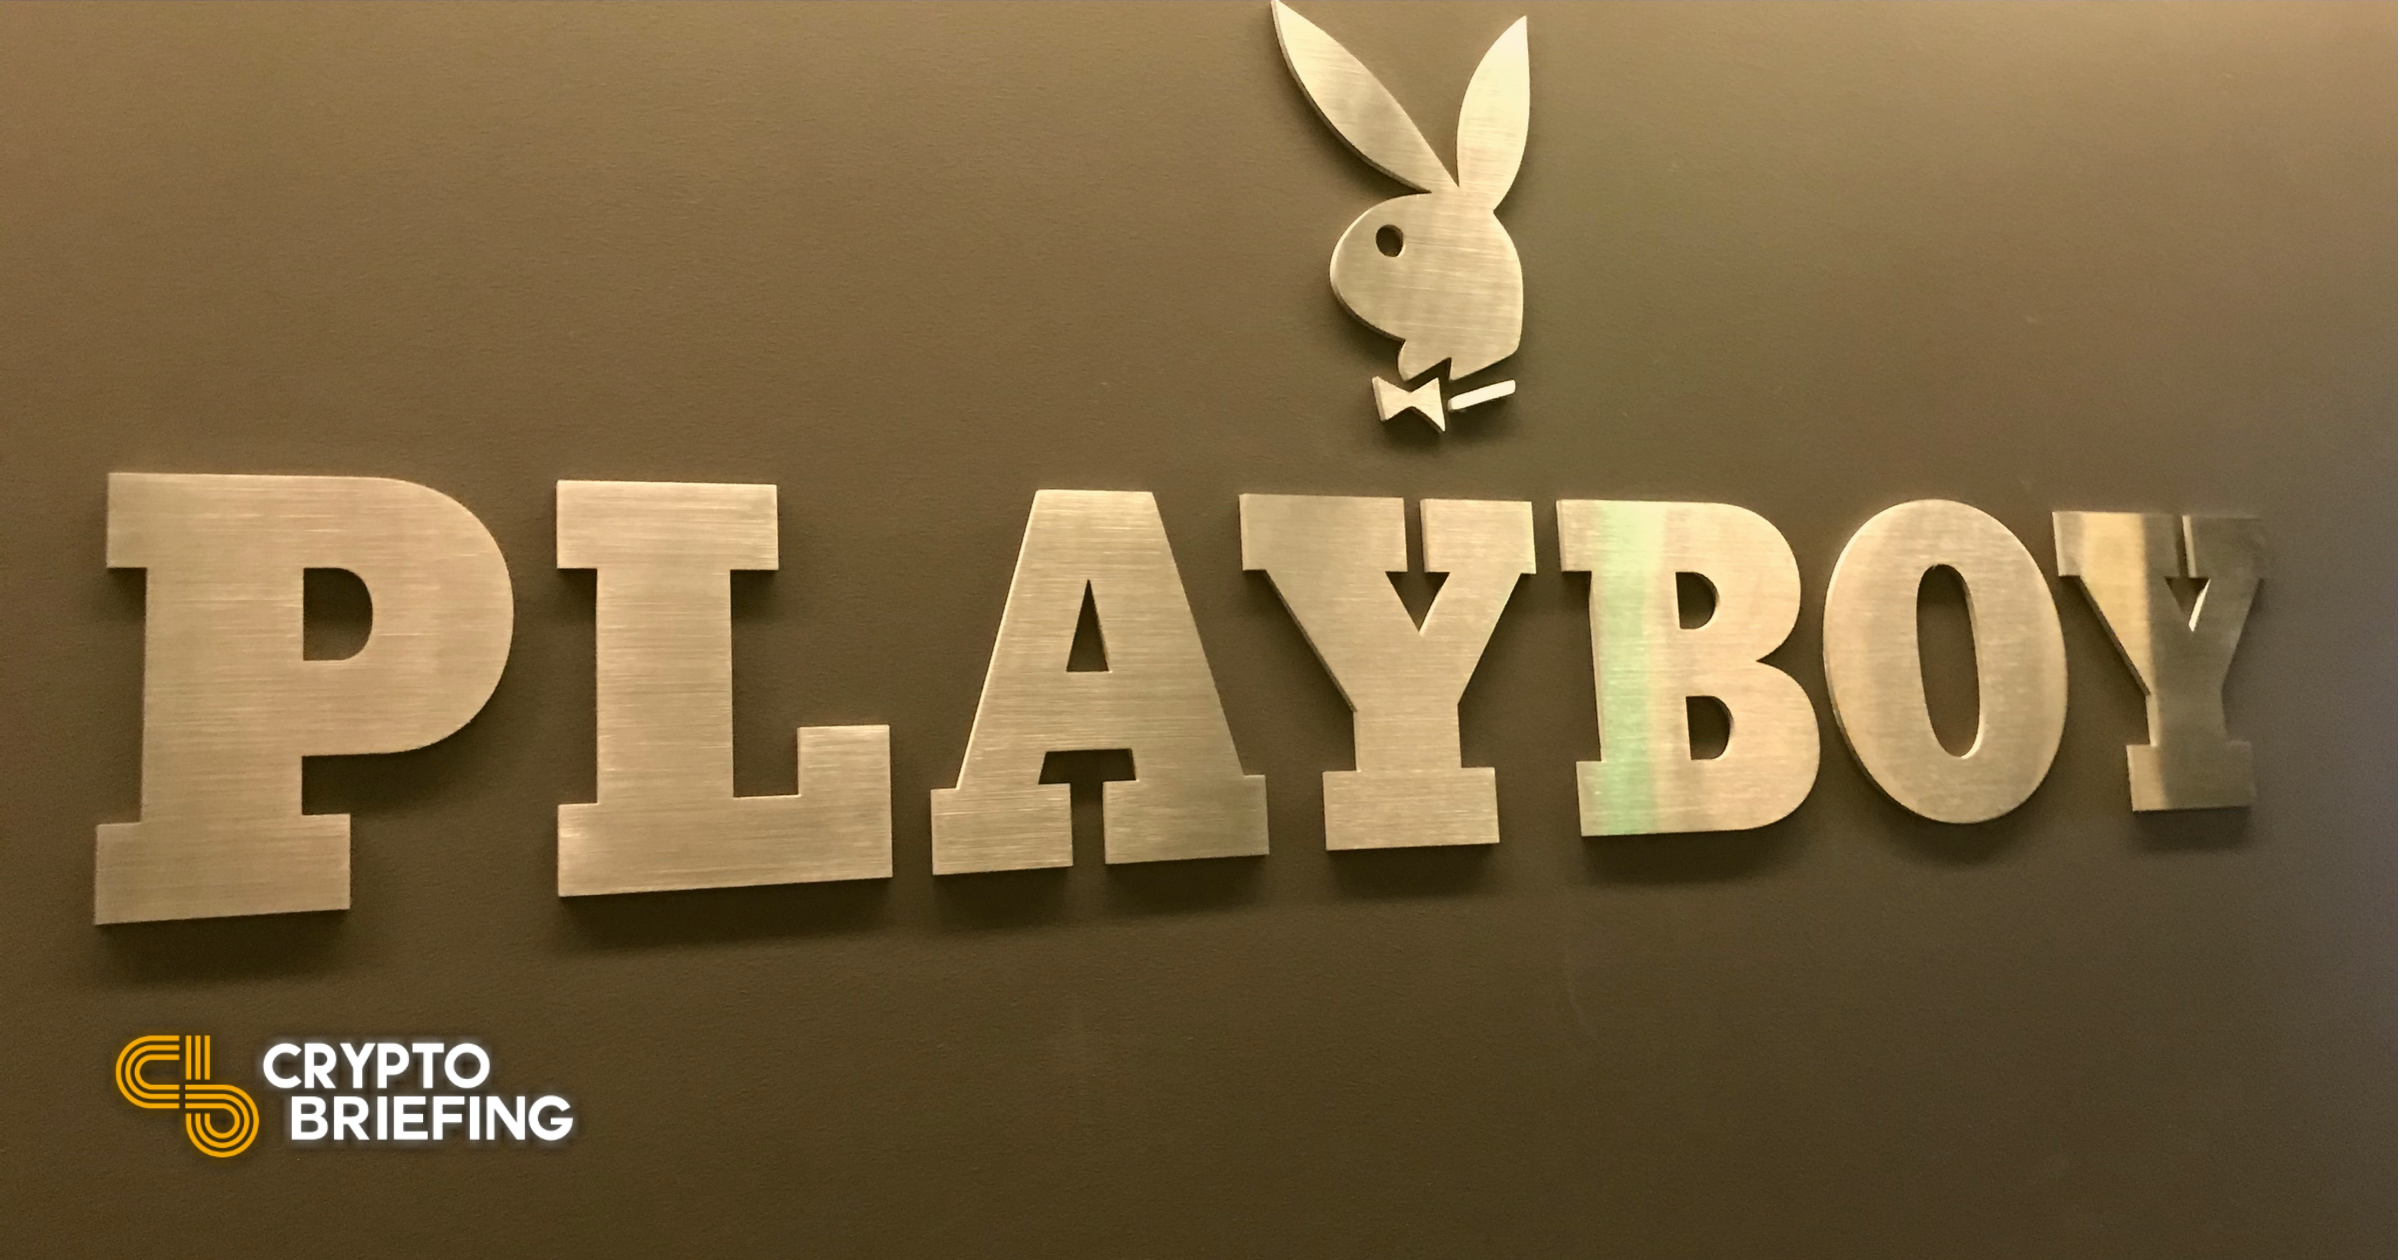 playboy-partners-with-nifty-gateway-nft-platform-crypto-briefing